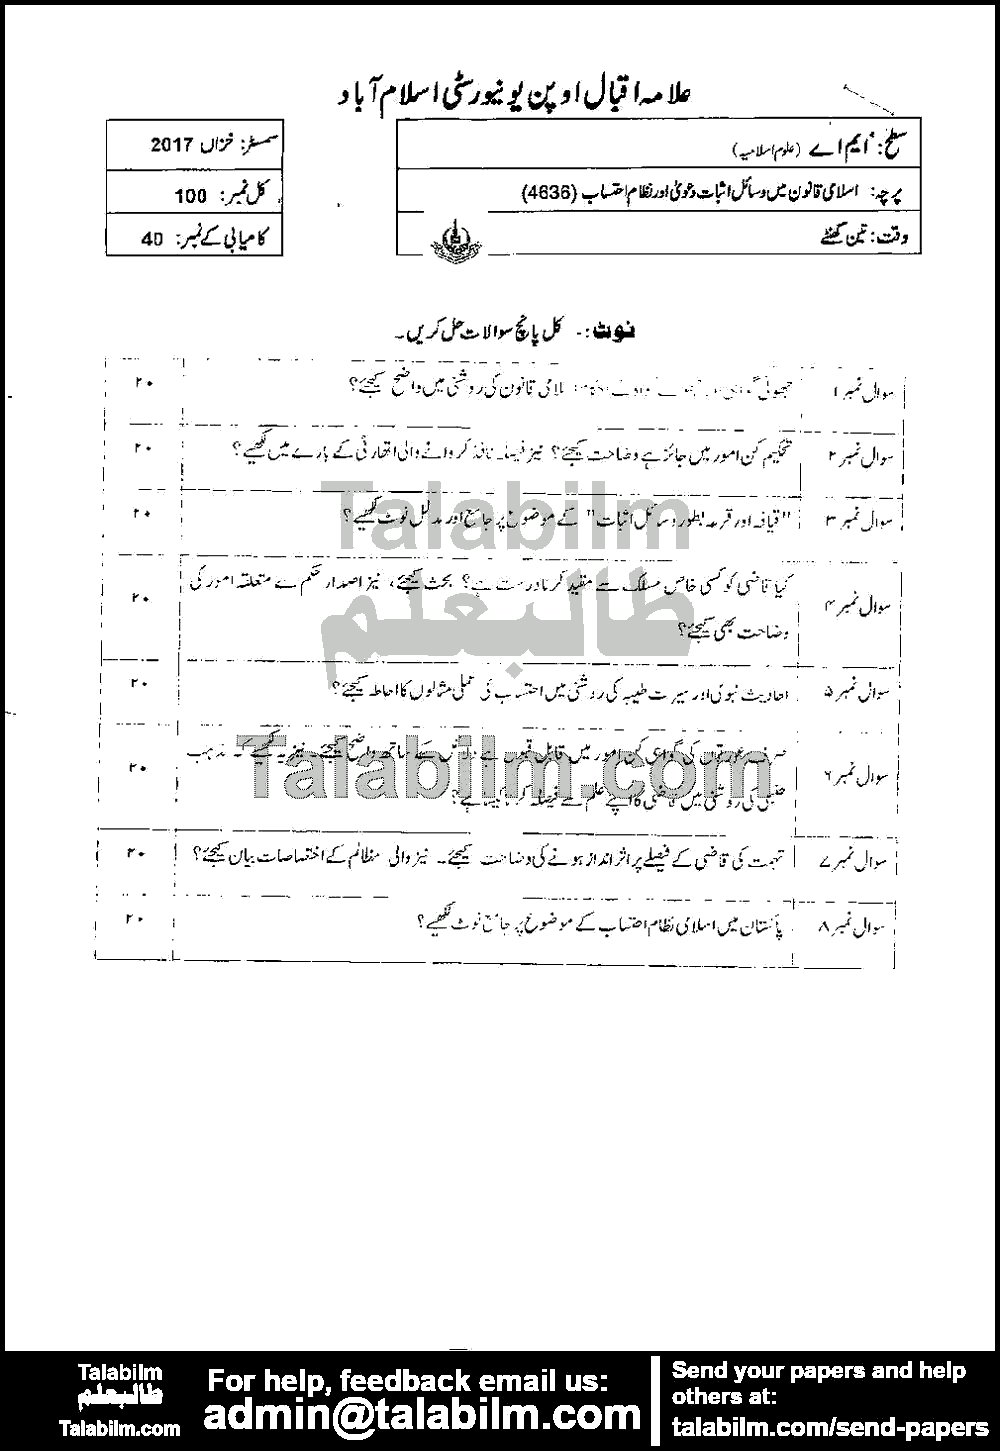 Wasail-e-Isbat and Ehtisab in Islamic Law 4636 past paper for Autumn 2017